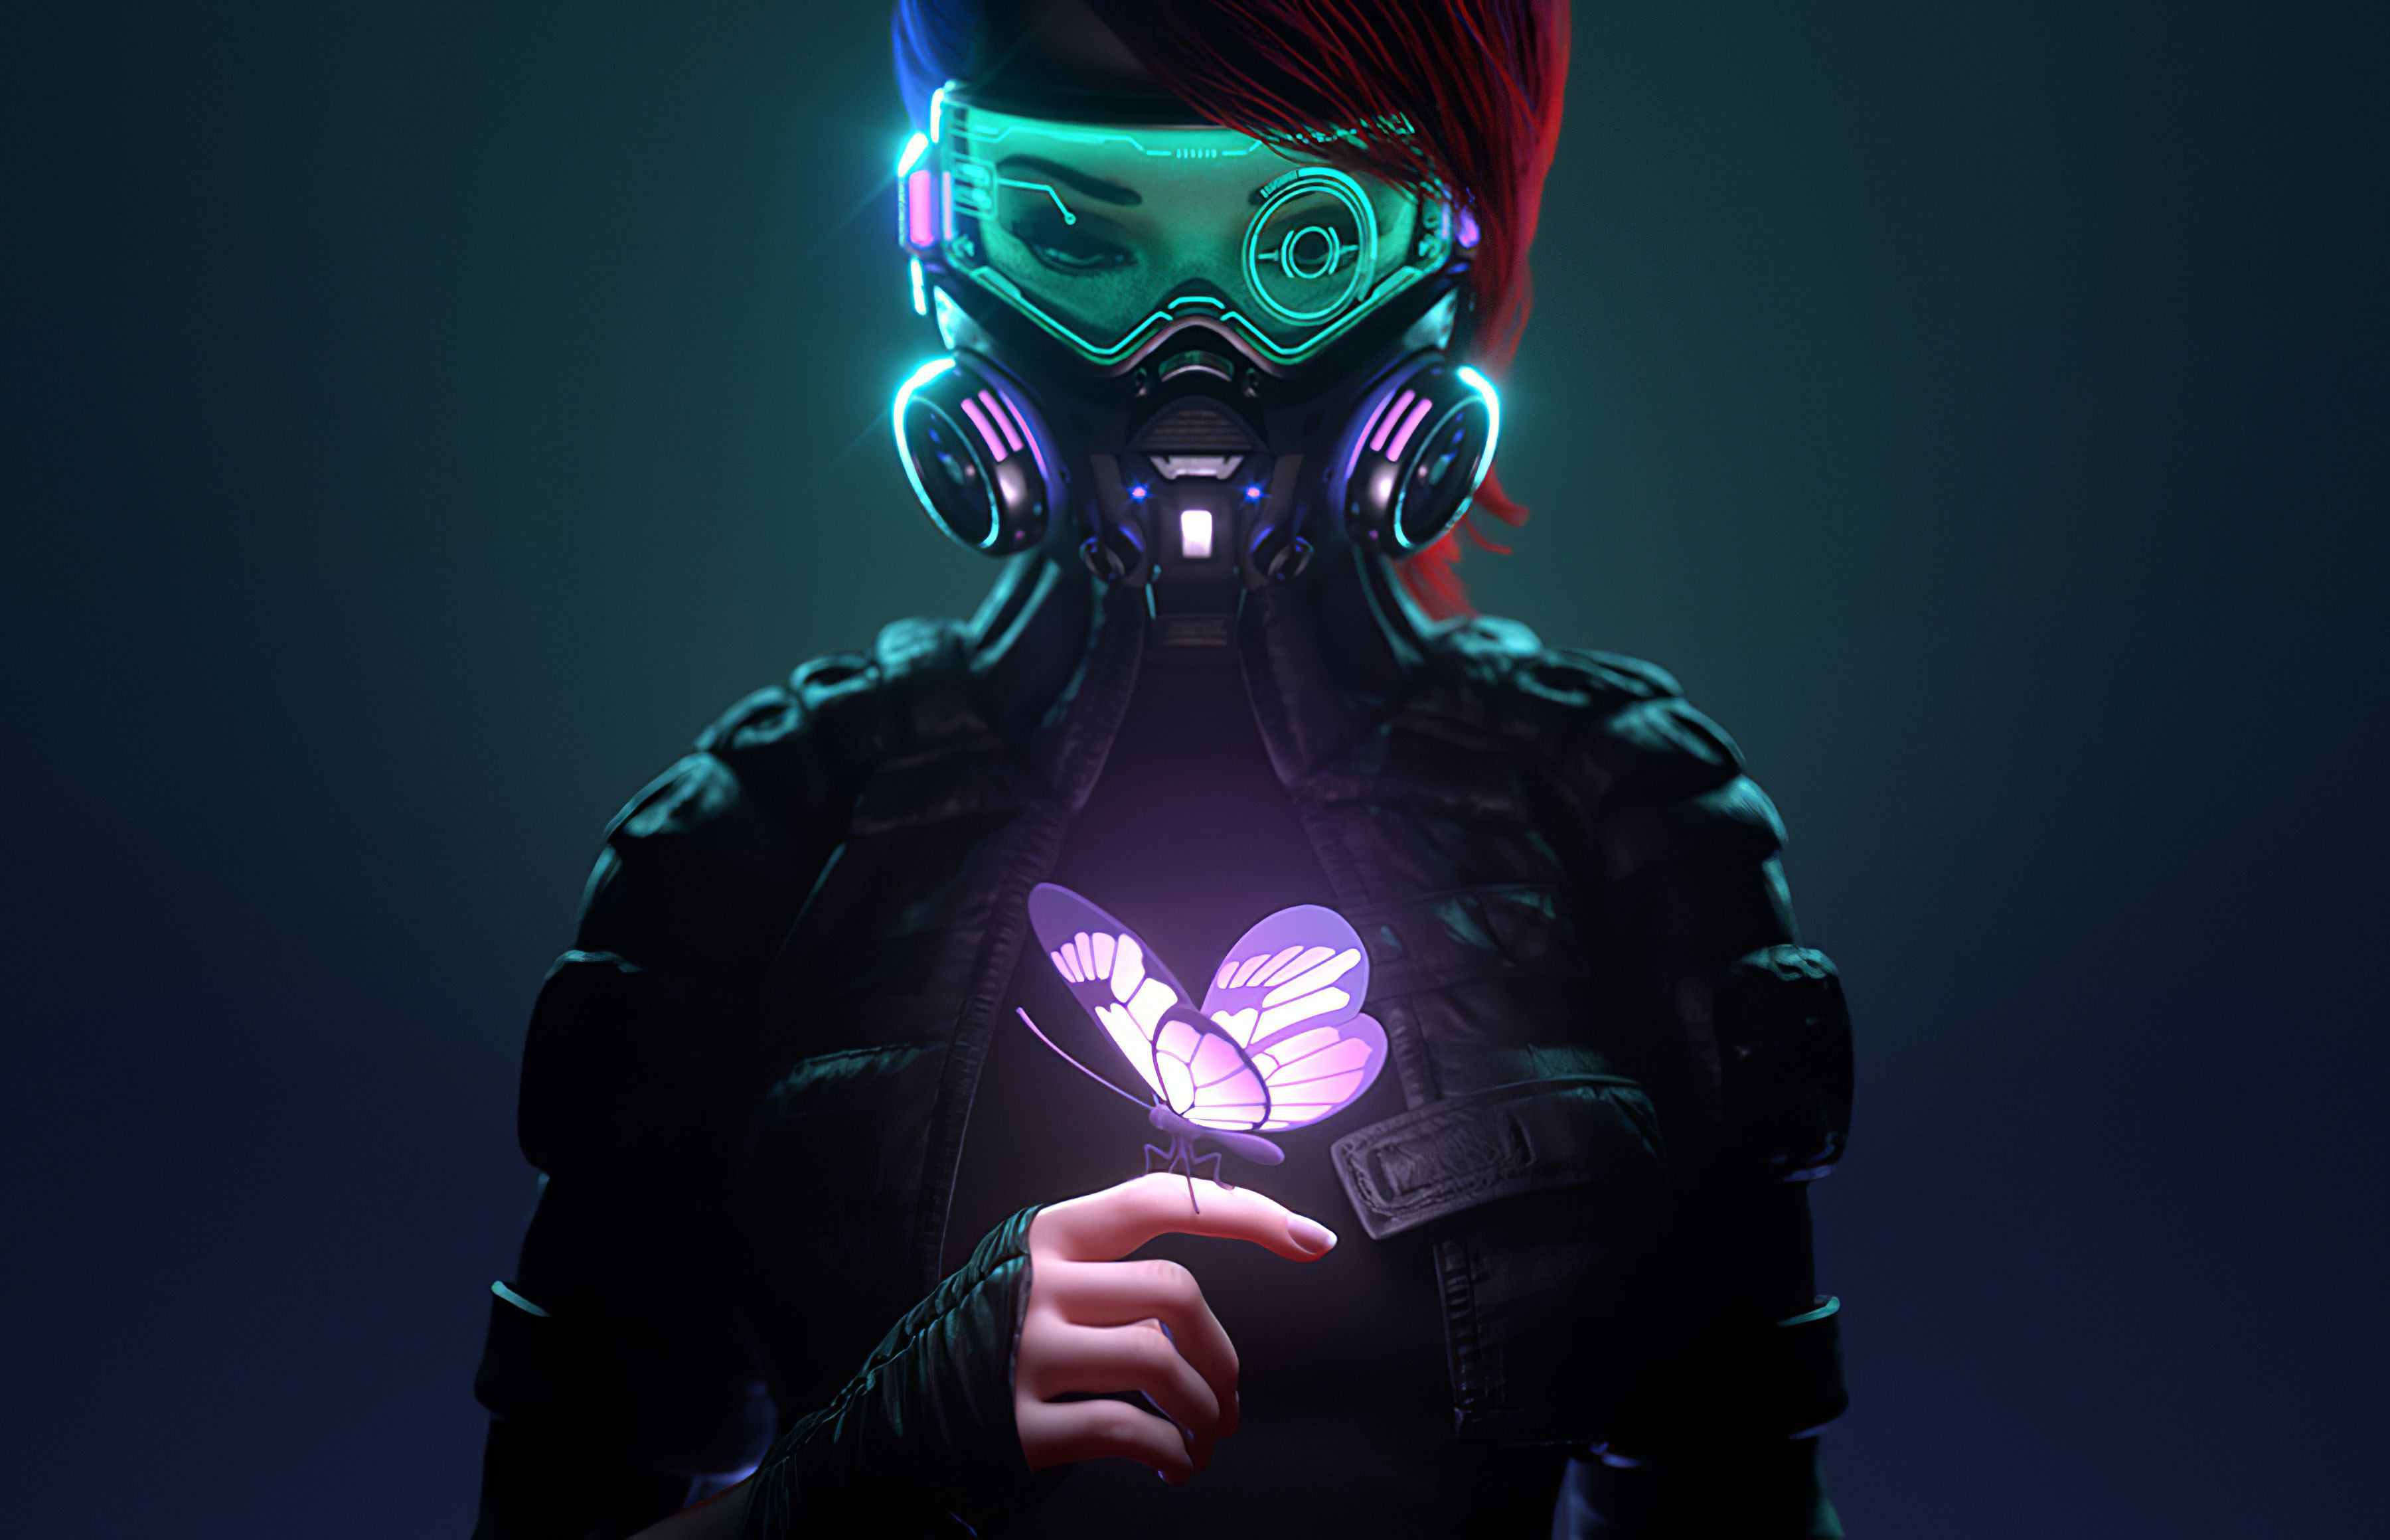 Cyberpunk Girl In A Gas Mask Looking At The Glowing Butterfly Landed On Her Finger 4k, HD Artist, 4k Wallpaper, Image, Background, Photo and Picture